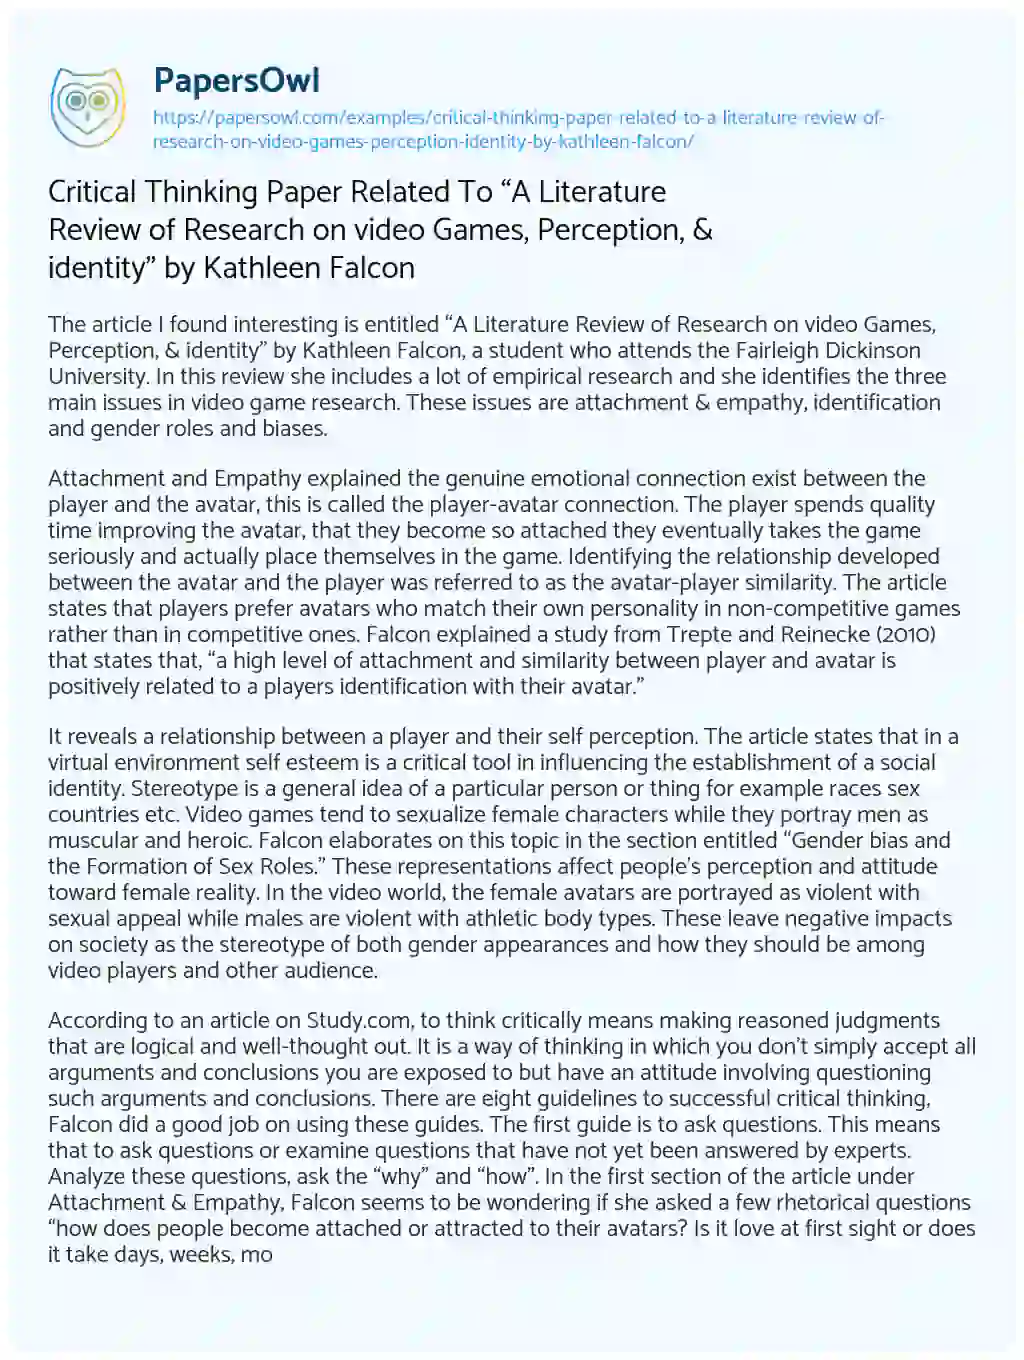 Essay on Critical Thinking Paper Related to “A Literature Review of Research on Video Games, Perception, & Identity” by Kathleen Falcon